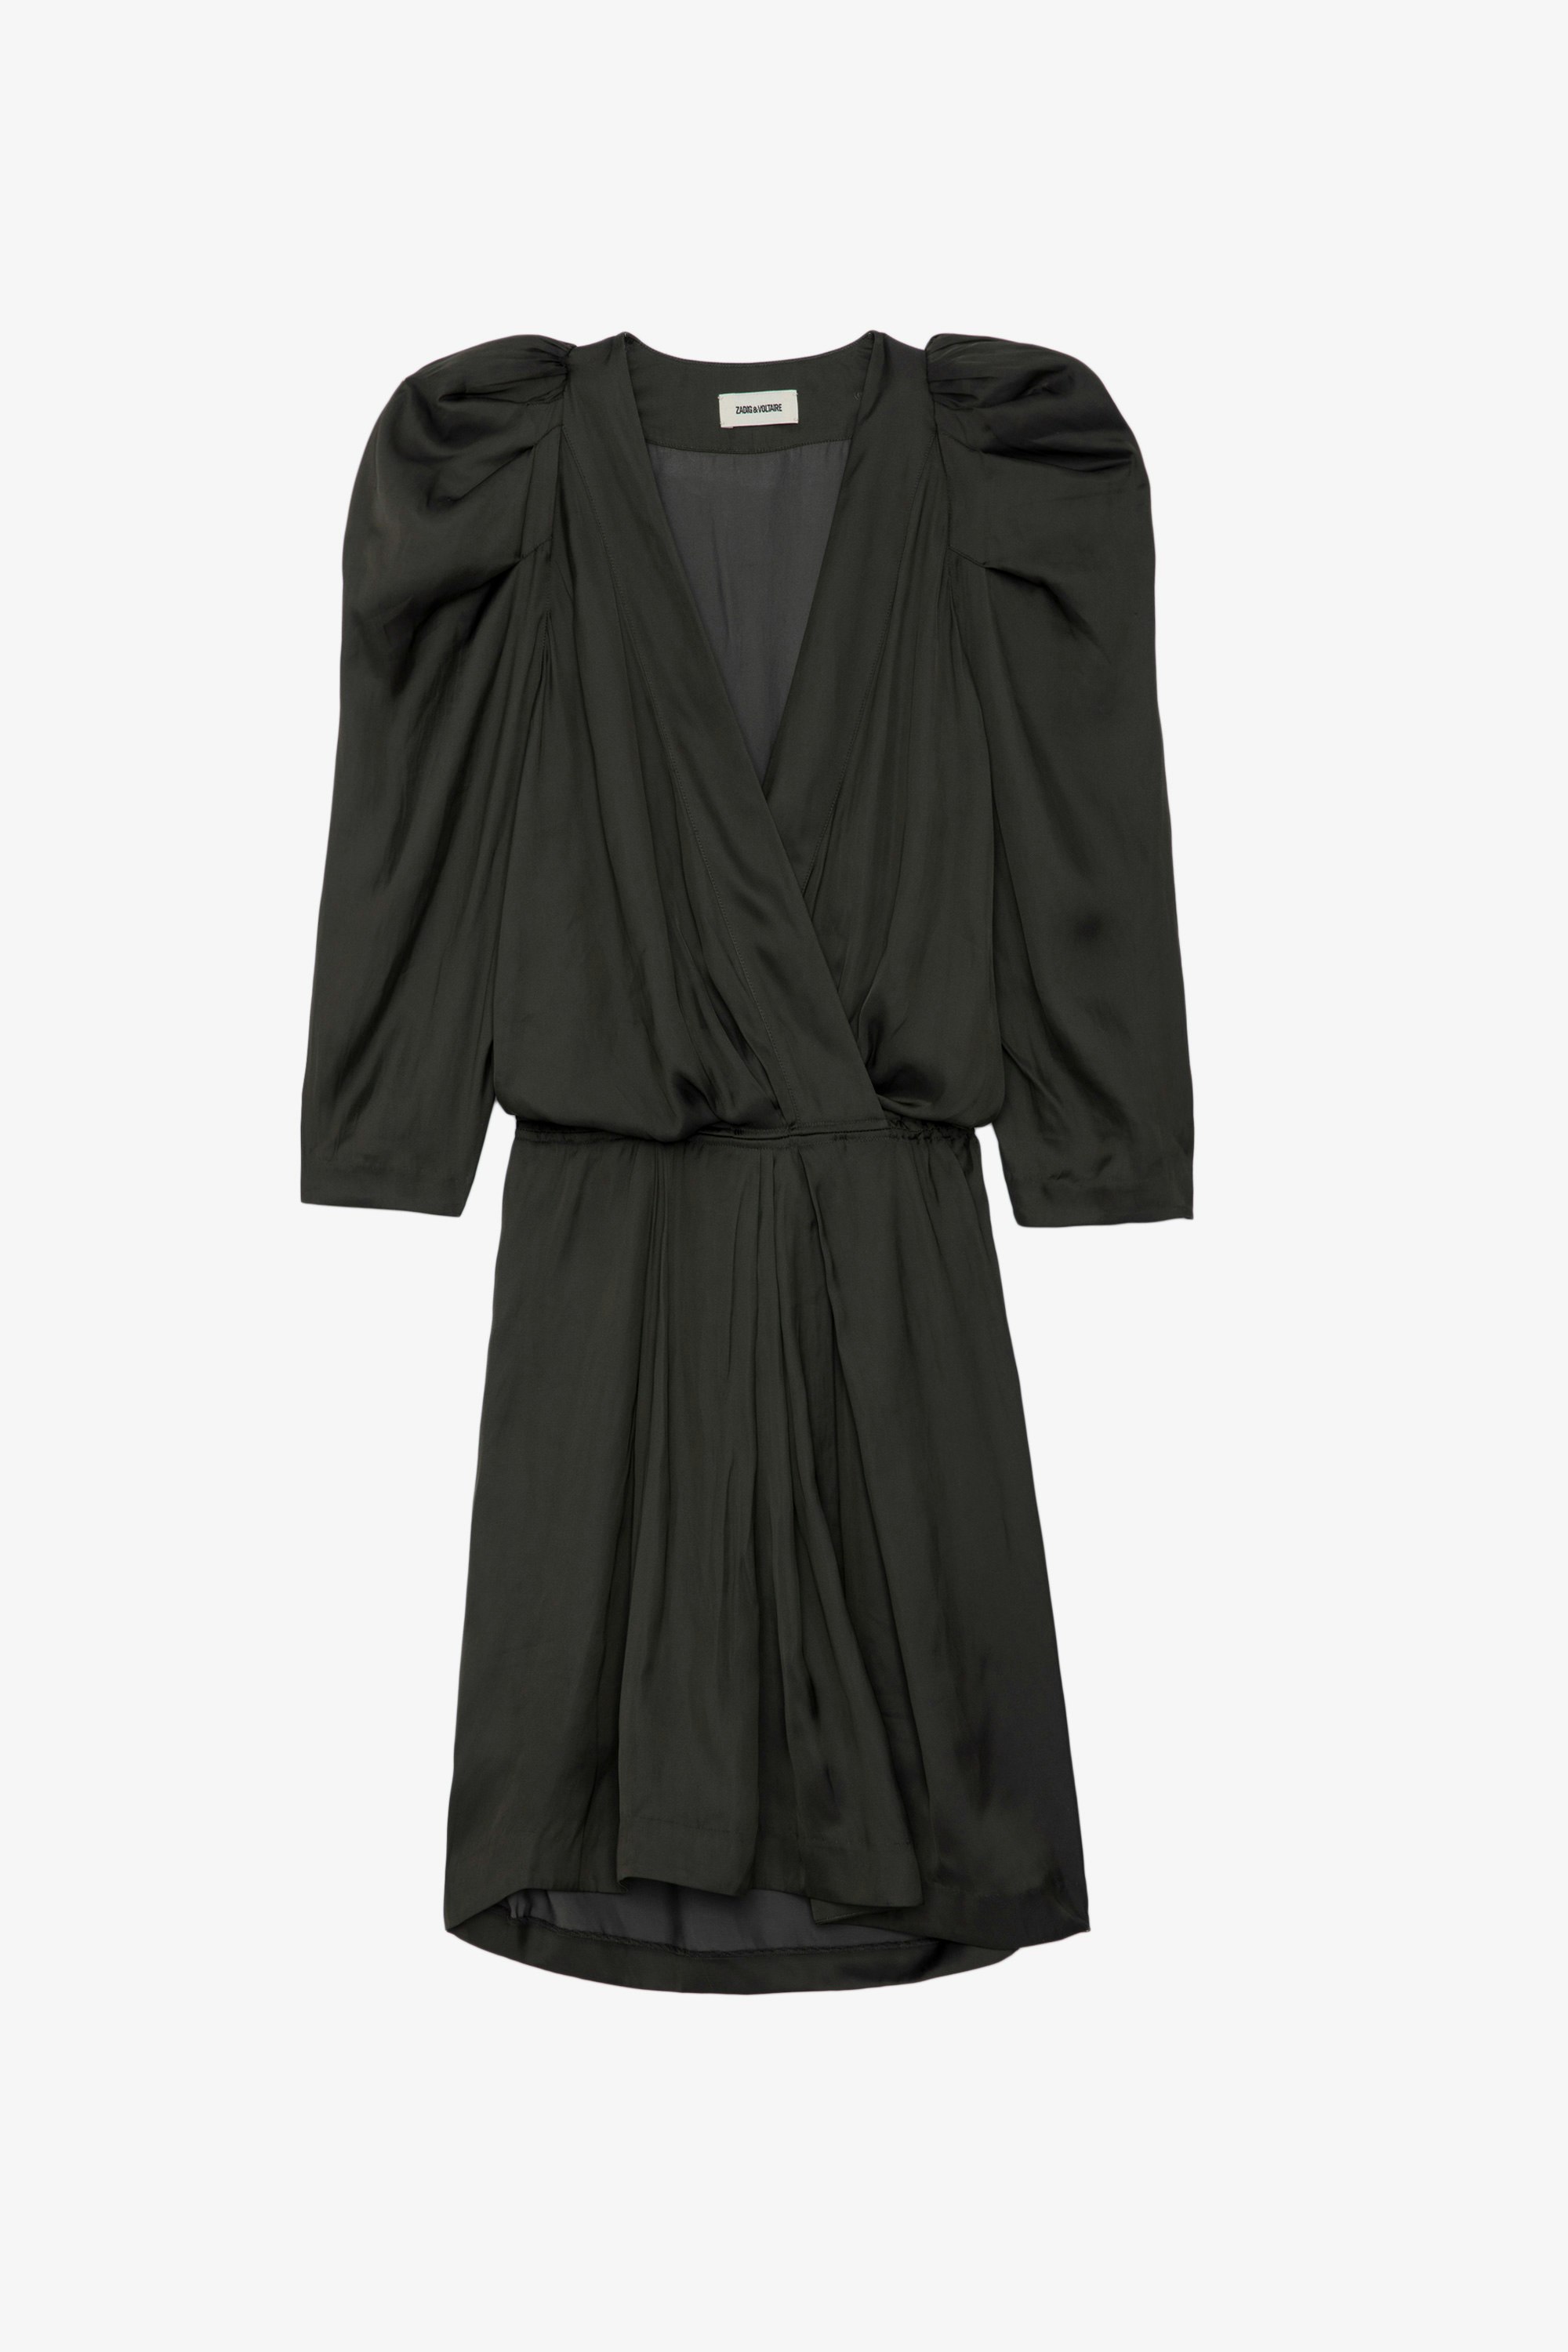 Ruz Satin Dress - Short charcoal satin dress with 3/4-length sleeves, elasticated waist and gathers on the shoulders.